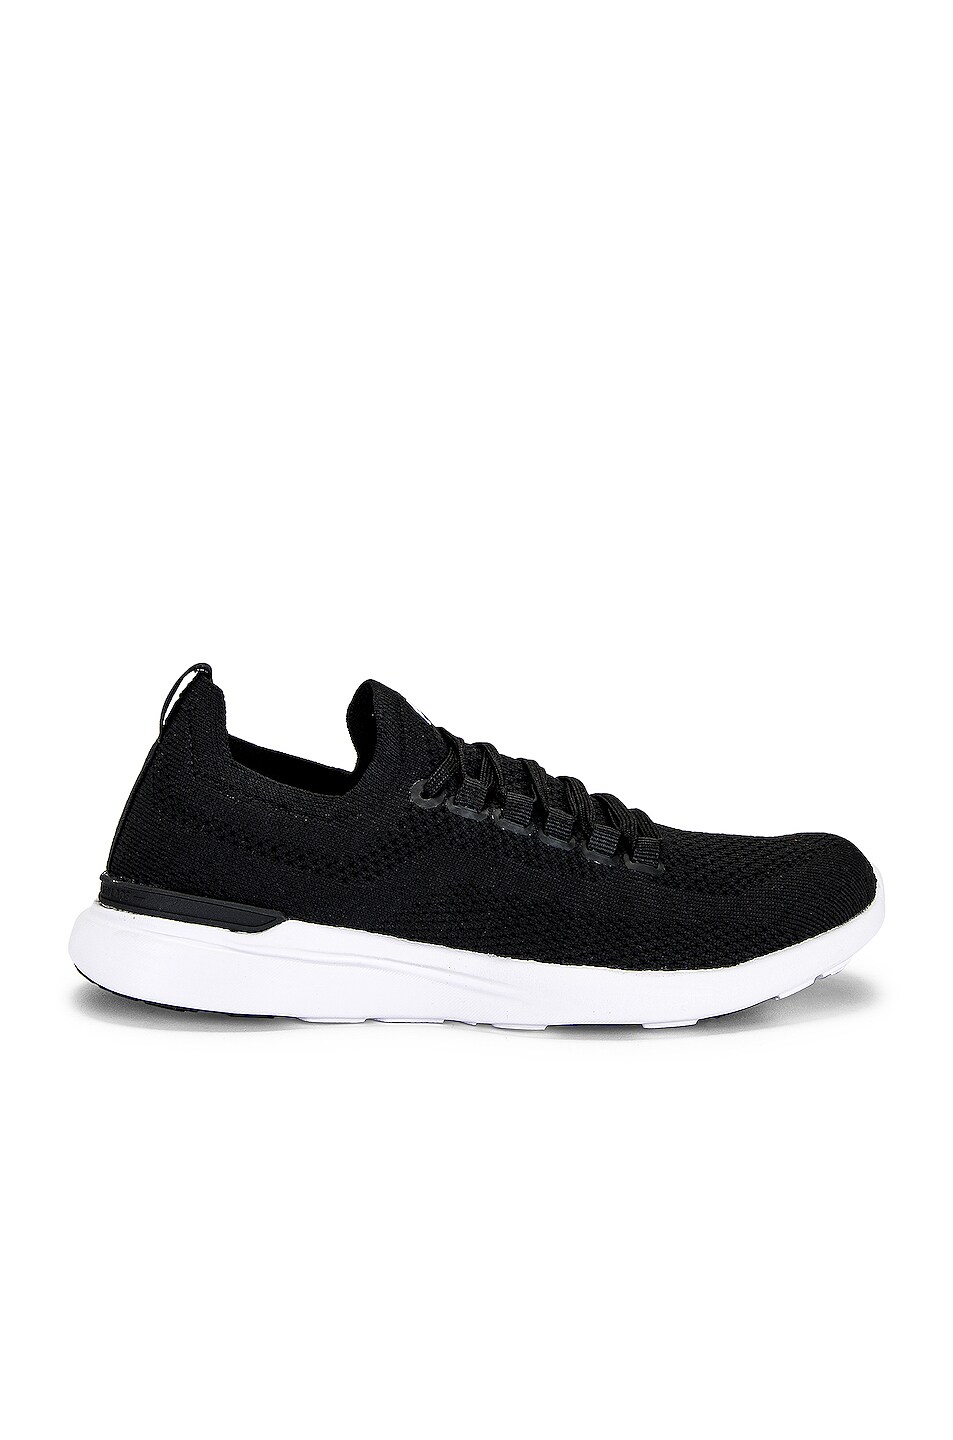 Image 1 of APL: Athletic Propulsion Labs TechLoom Breeze in Black & White